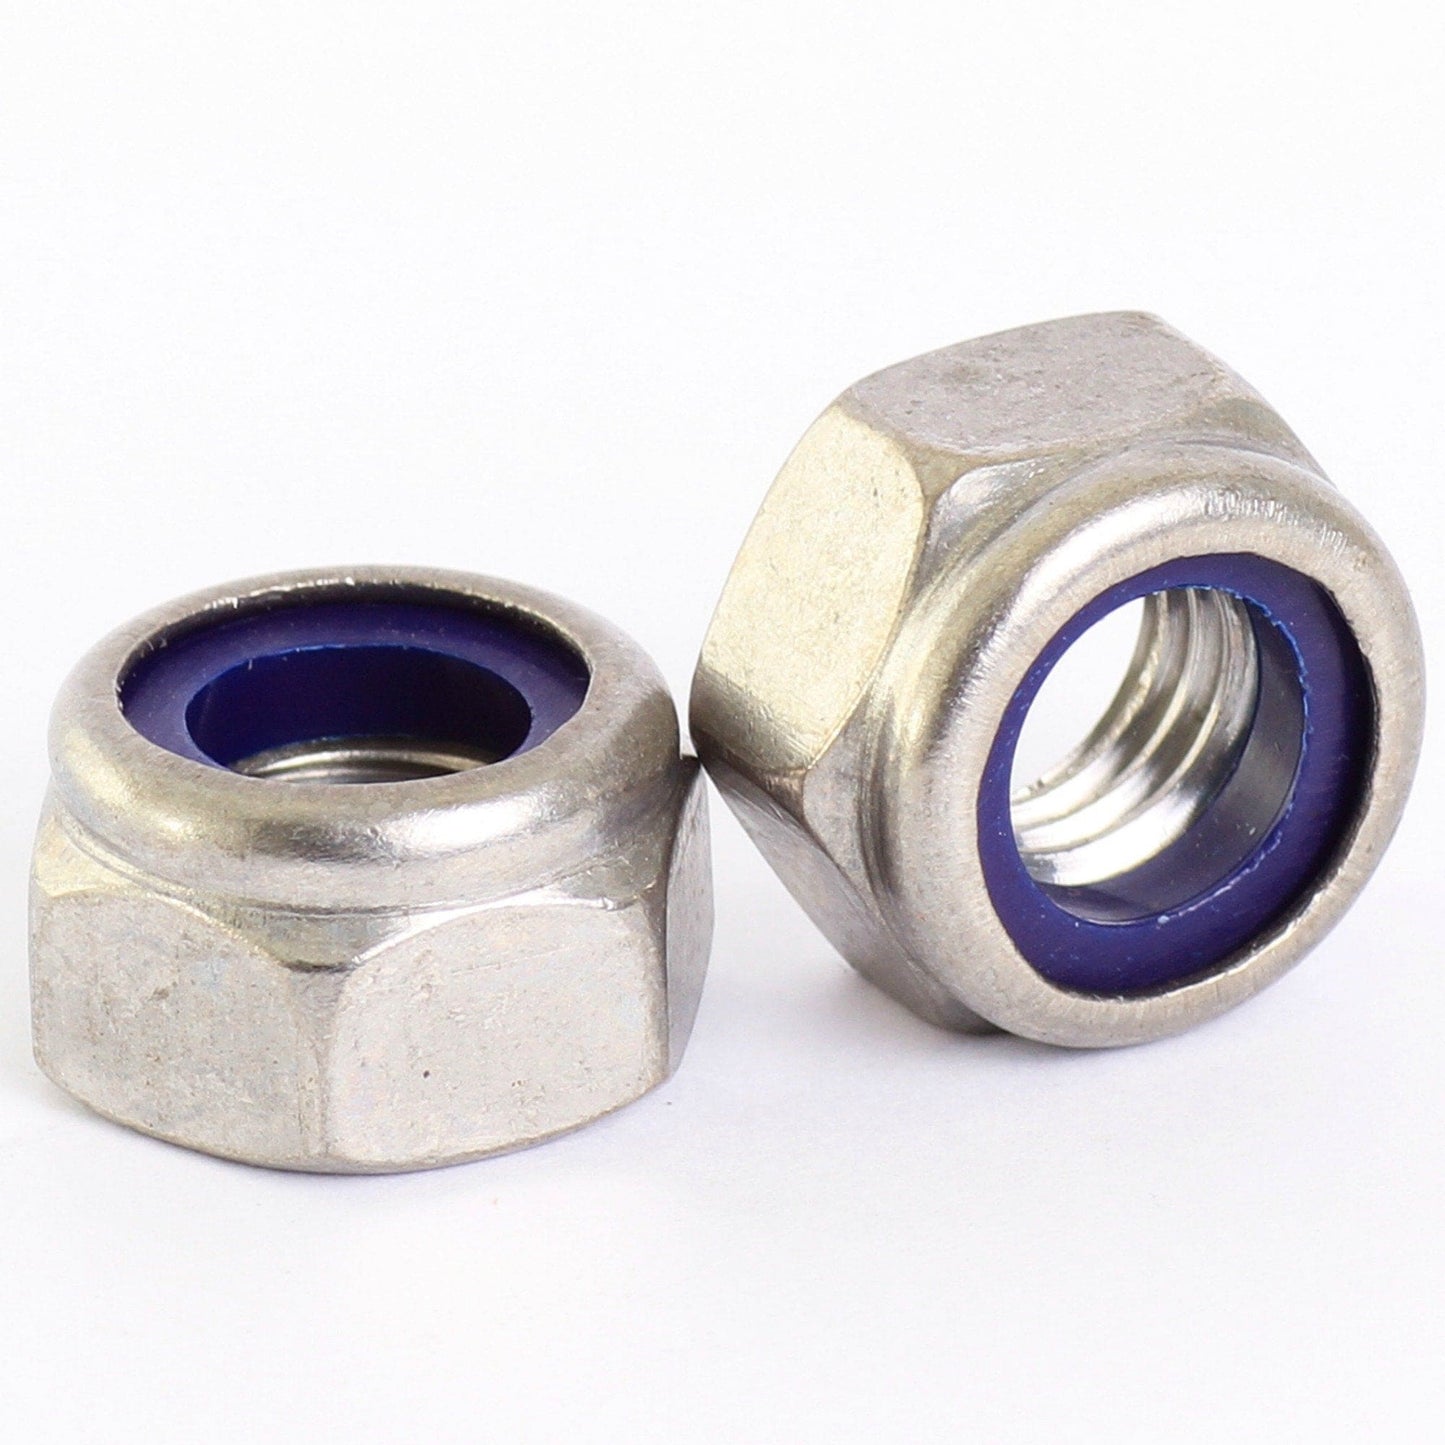 M18 NYLOC NUTS T TYPE (18MM)